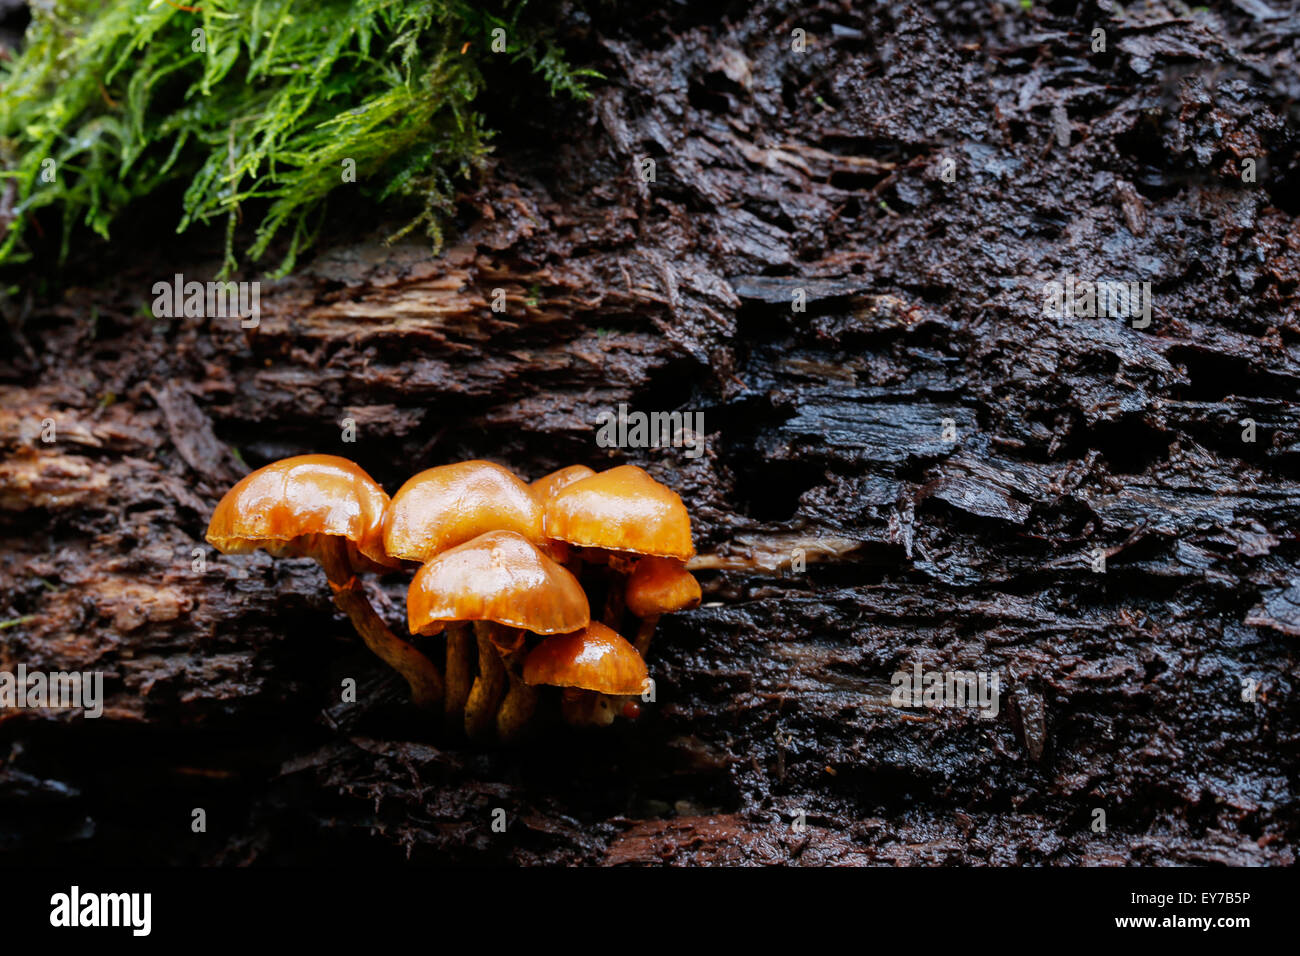 A small group of winter fungus growing on a decaying tree stump in damp woodland. Also known as velvet shank enoki Latin name flammulina velutipes Stock Photo